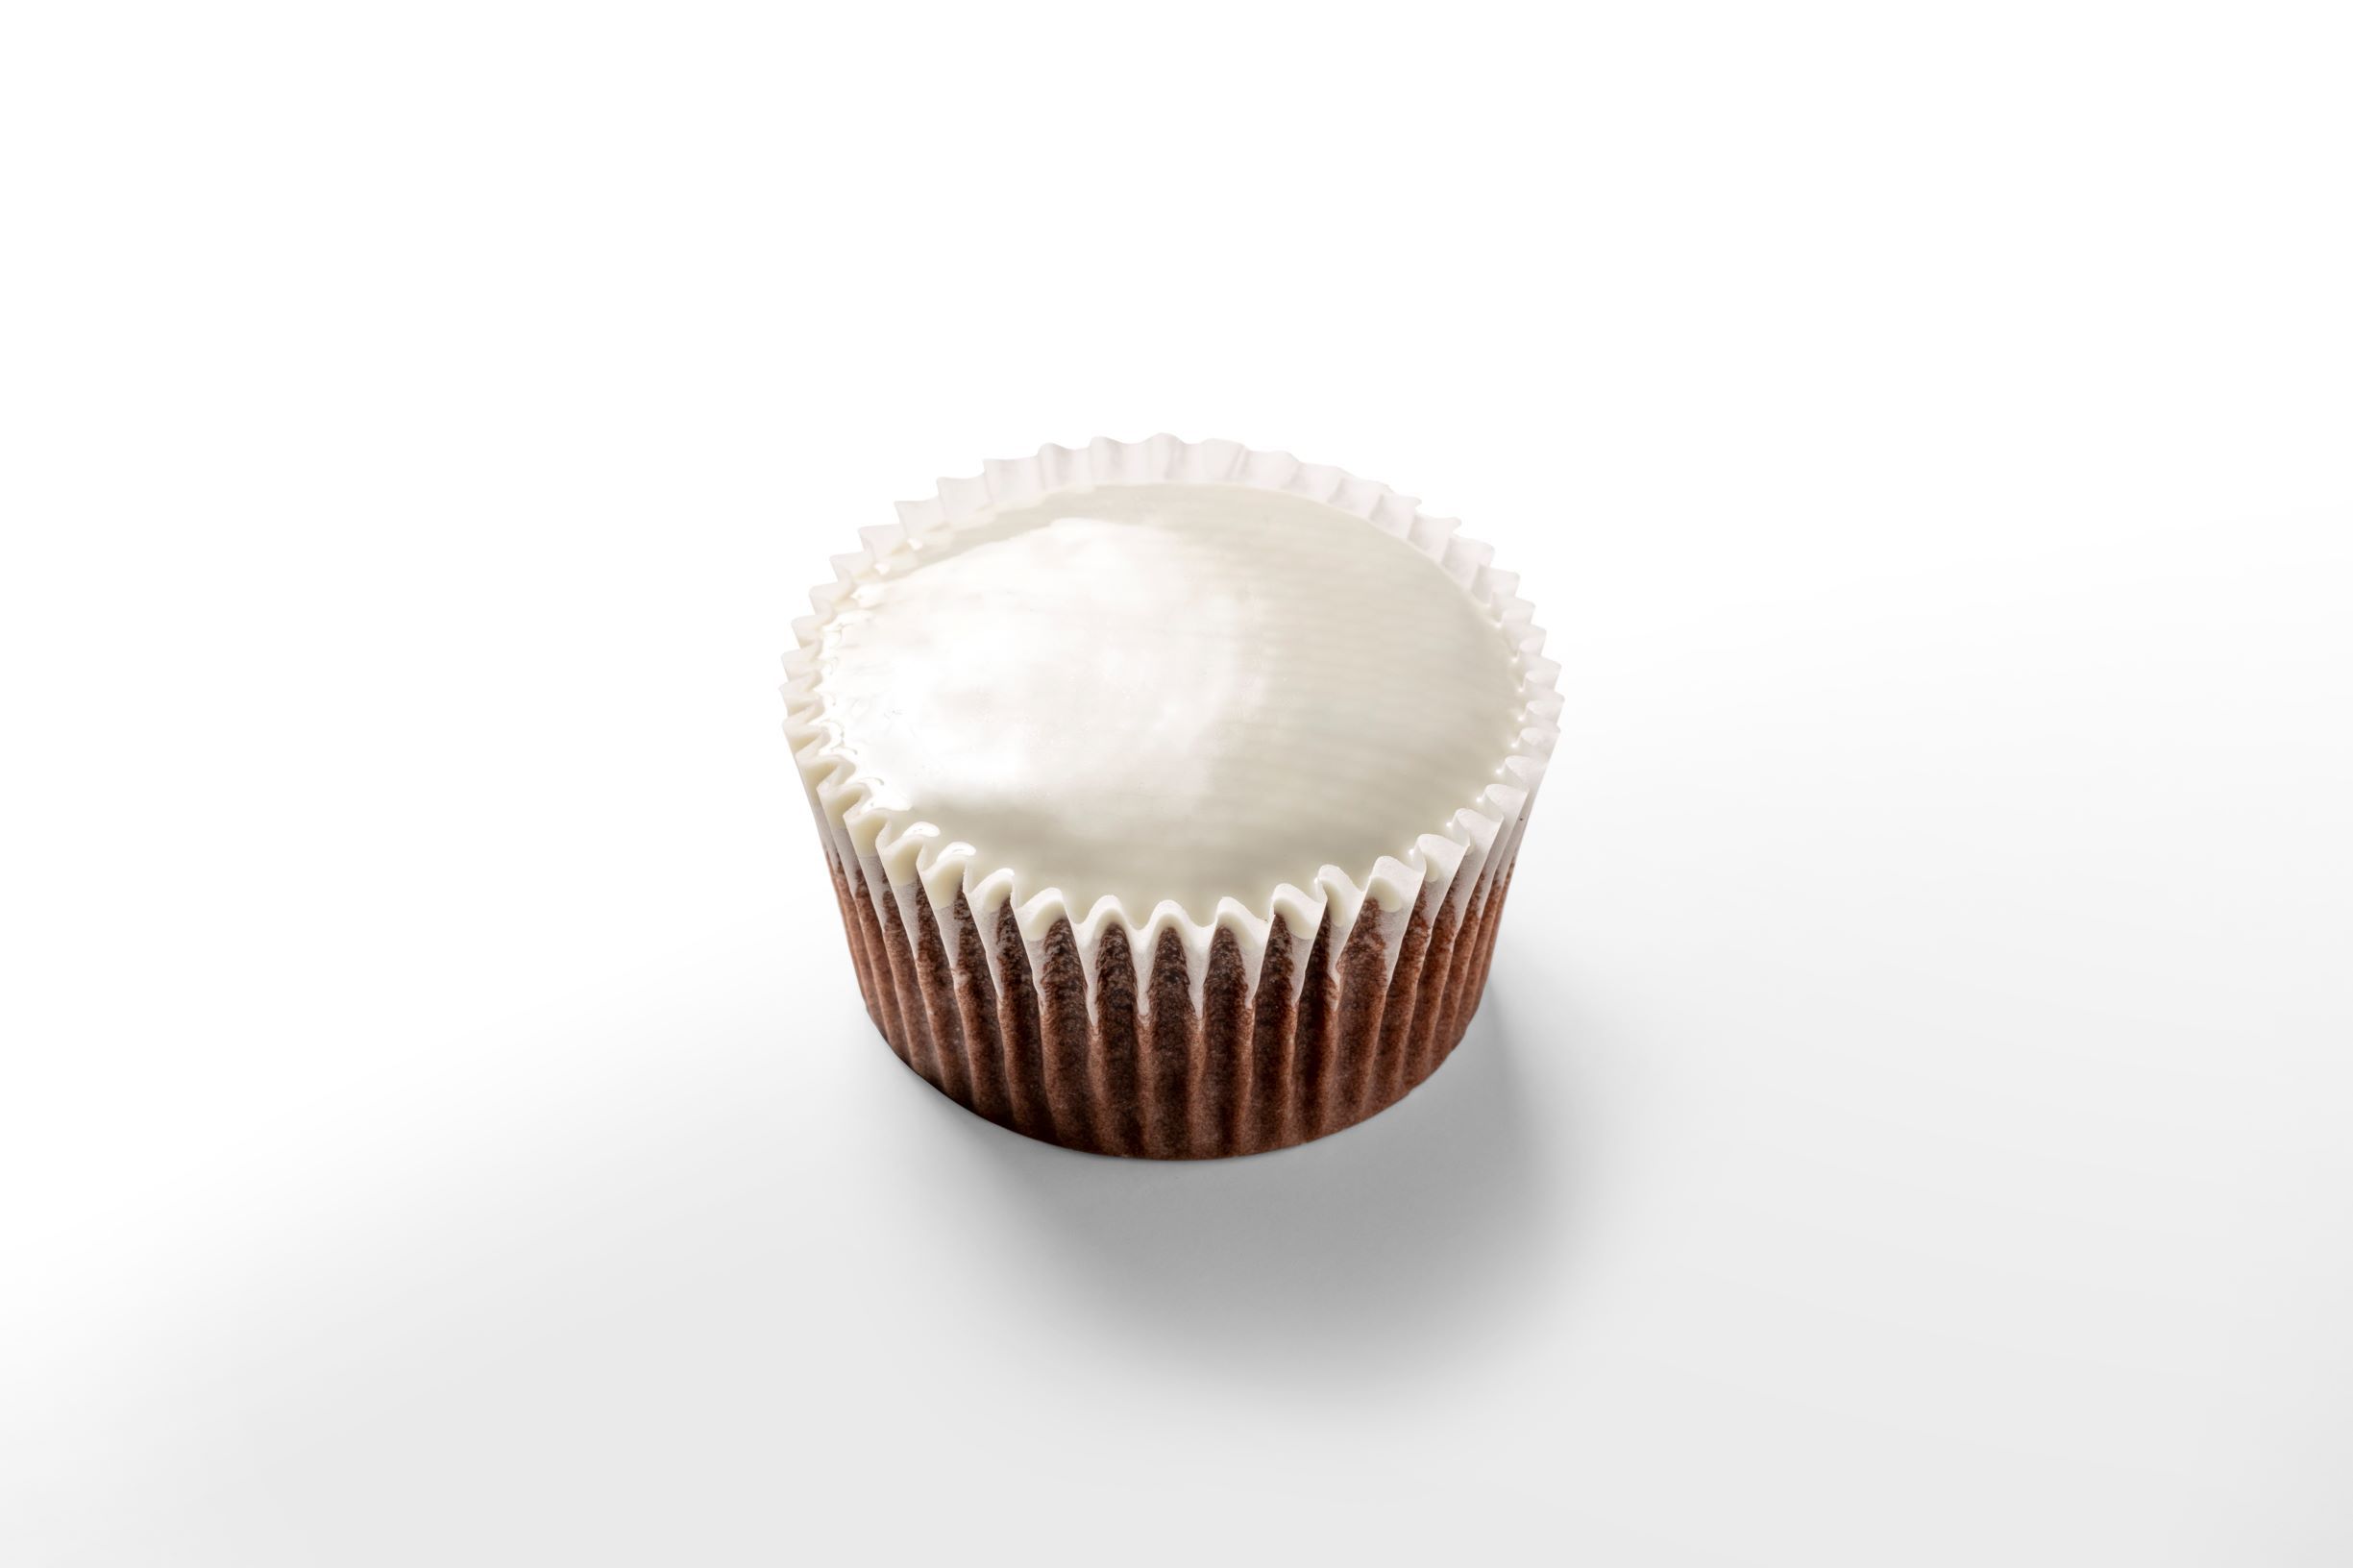 Cupcake covered with white chocolate by FoodJet chocolate depositor